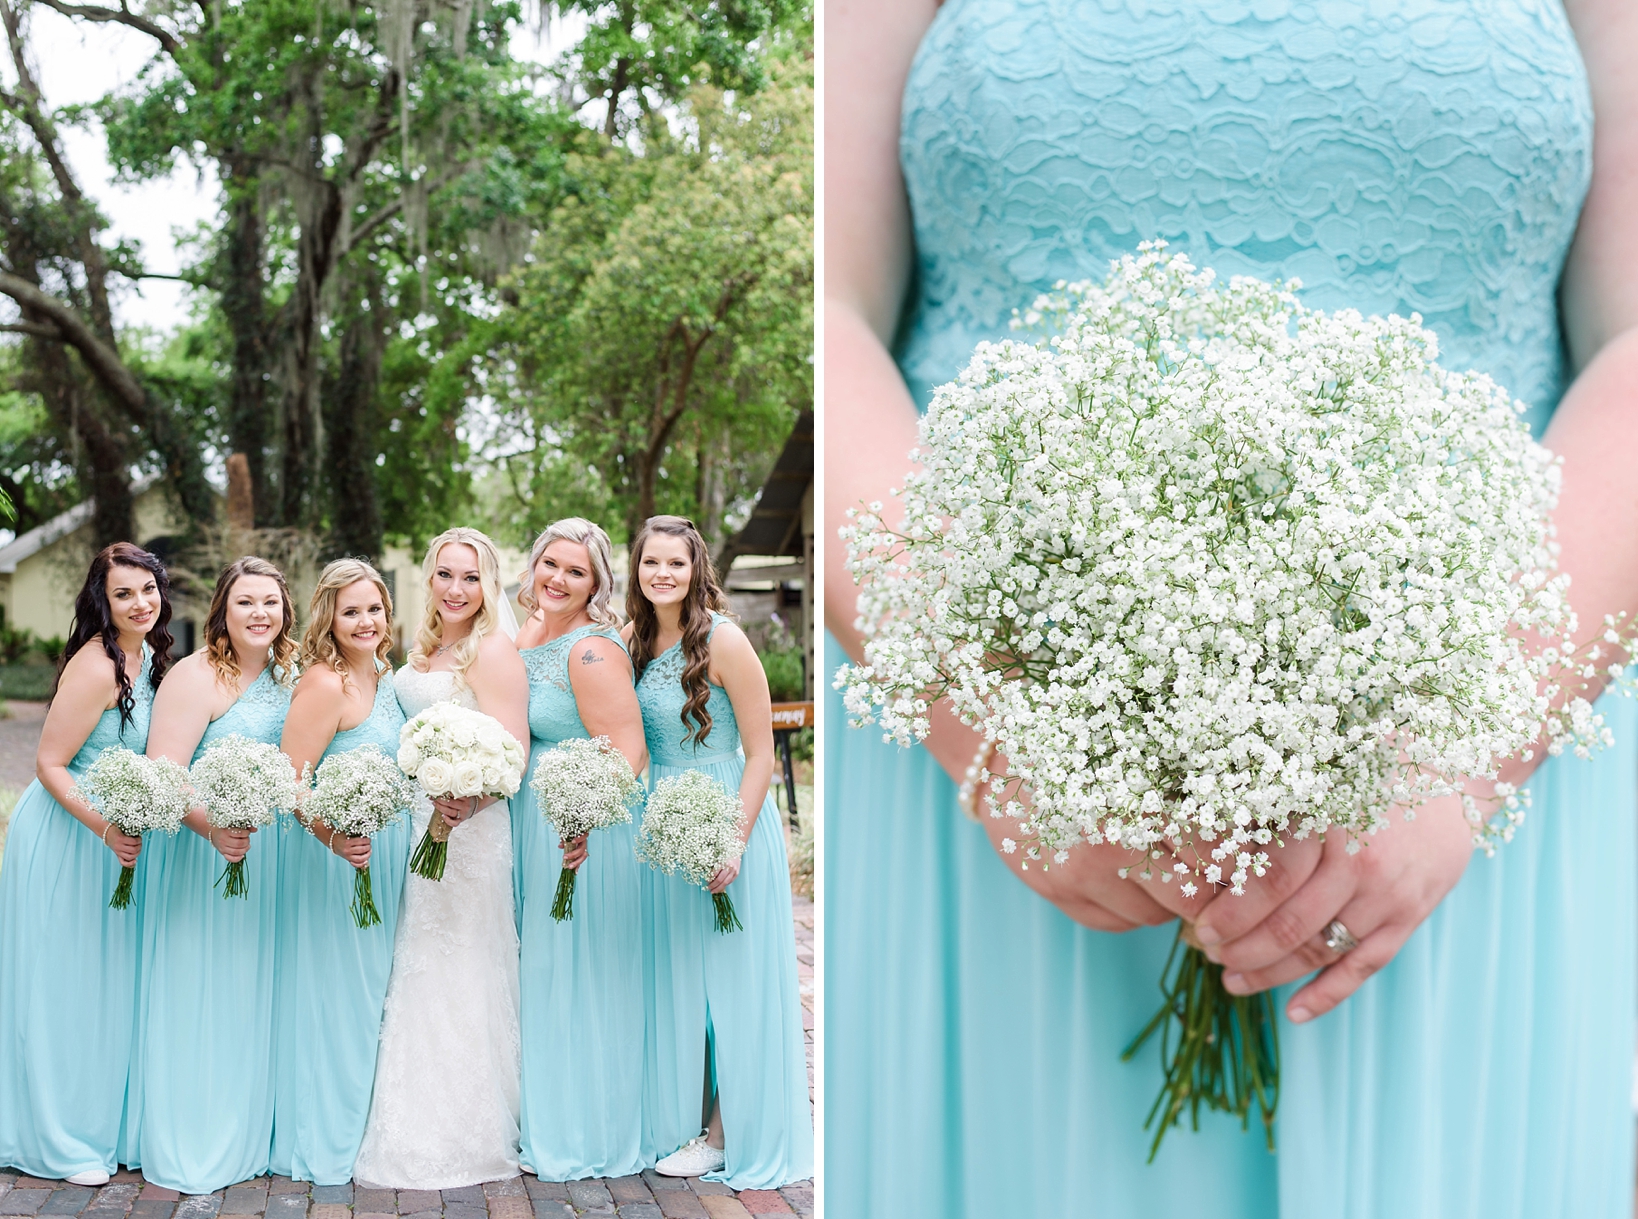 Baby's breath floral bouquets against the tiffany blue of the bridal gowns